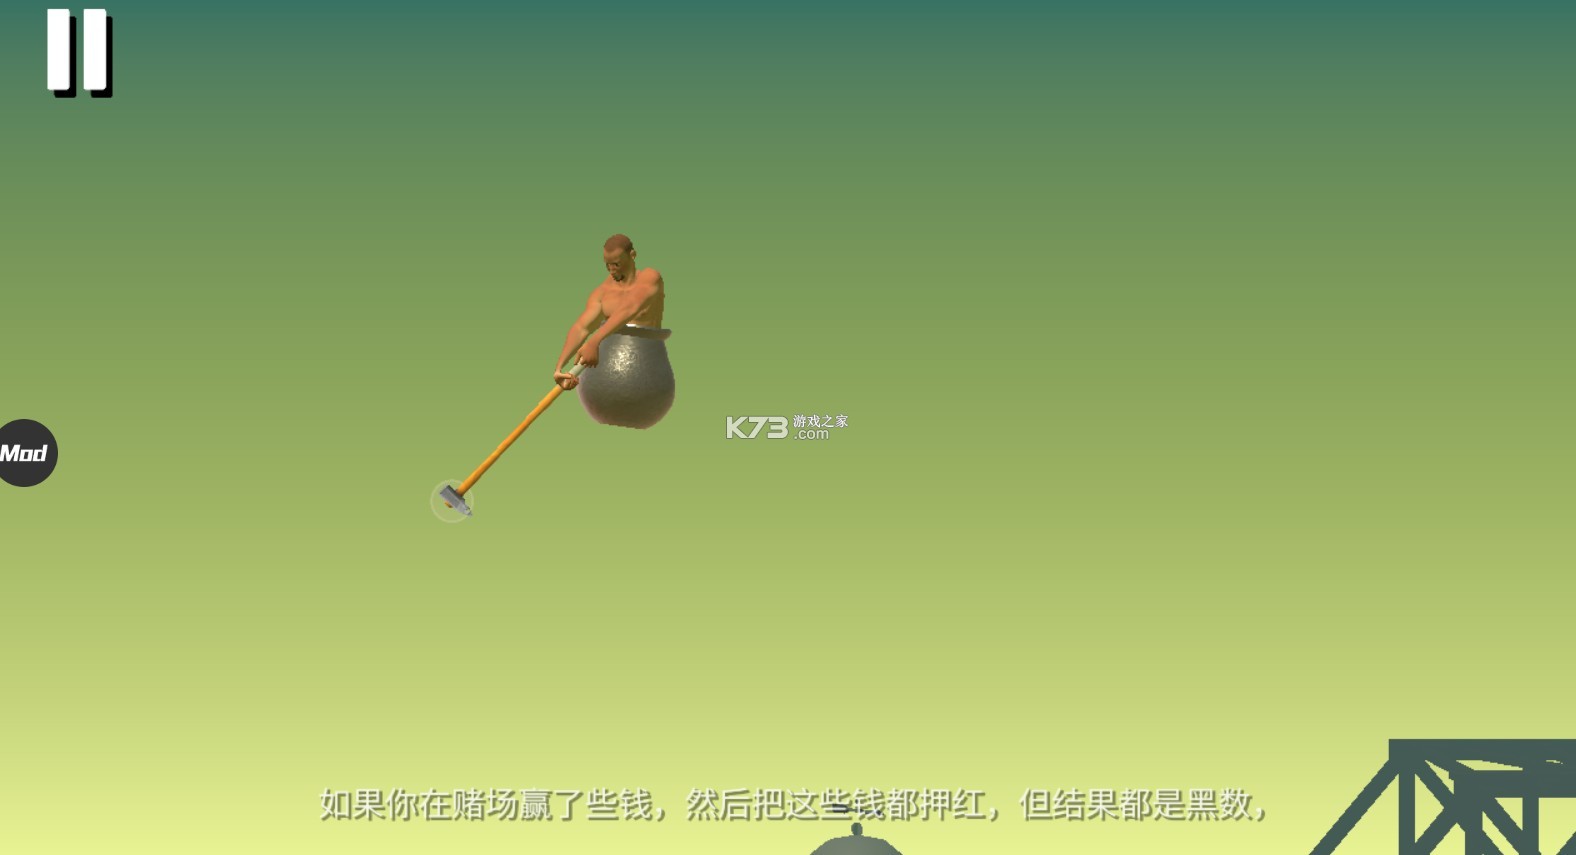 getting over itֻƽ-getting over itȥv1.9.4ֻ޹